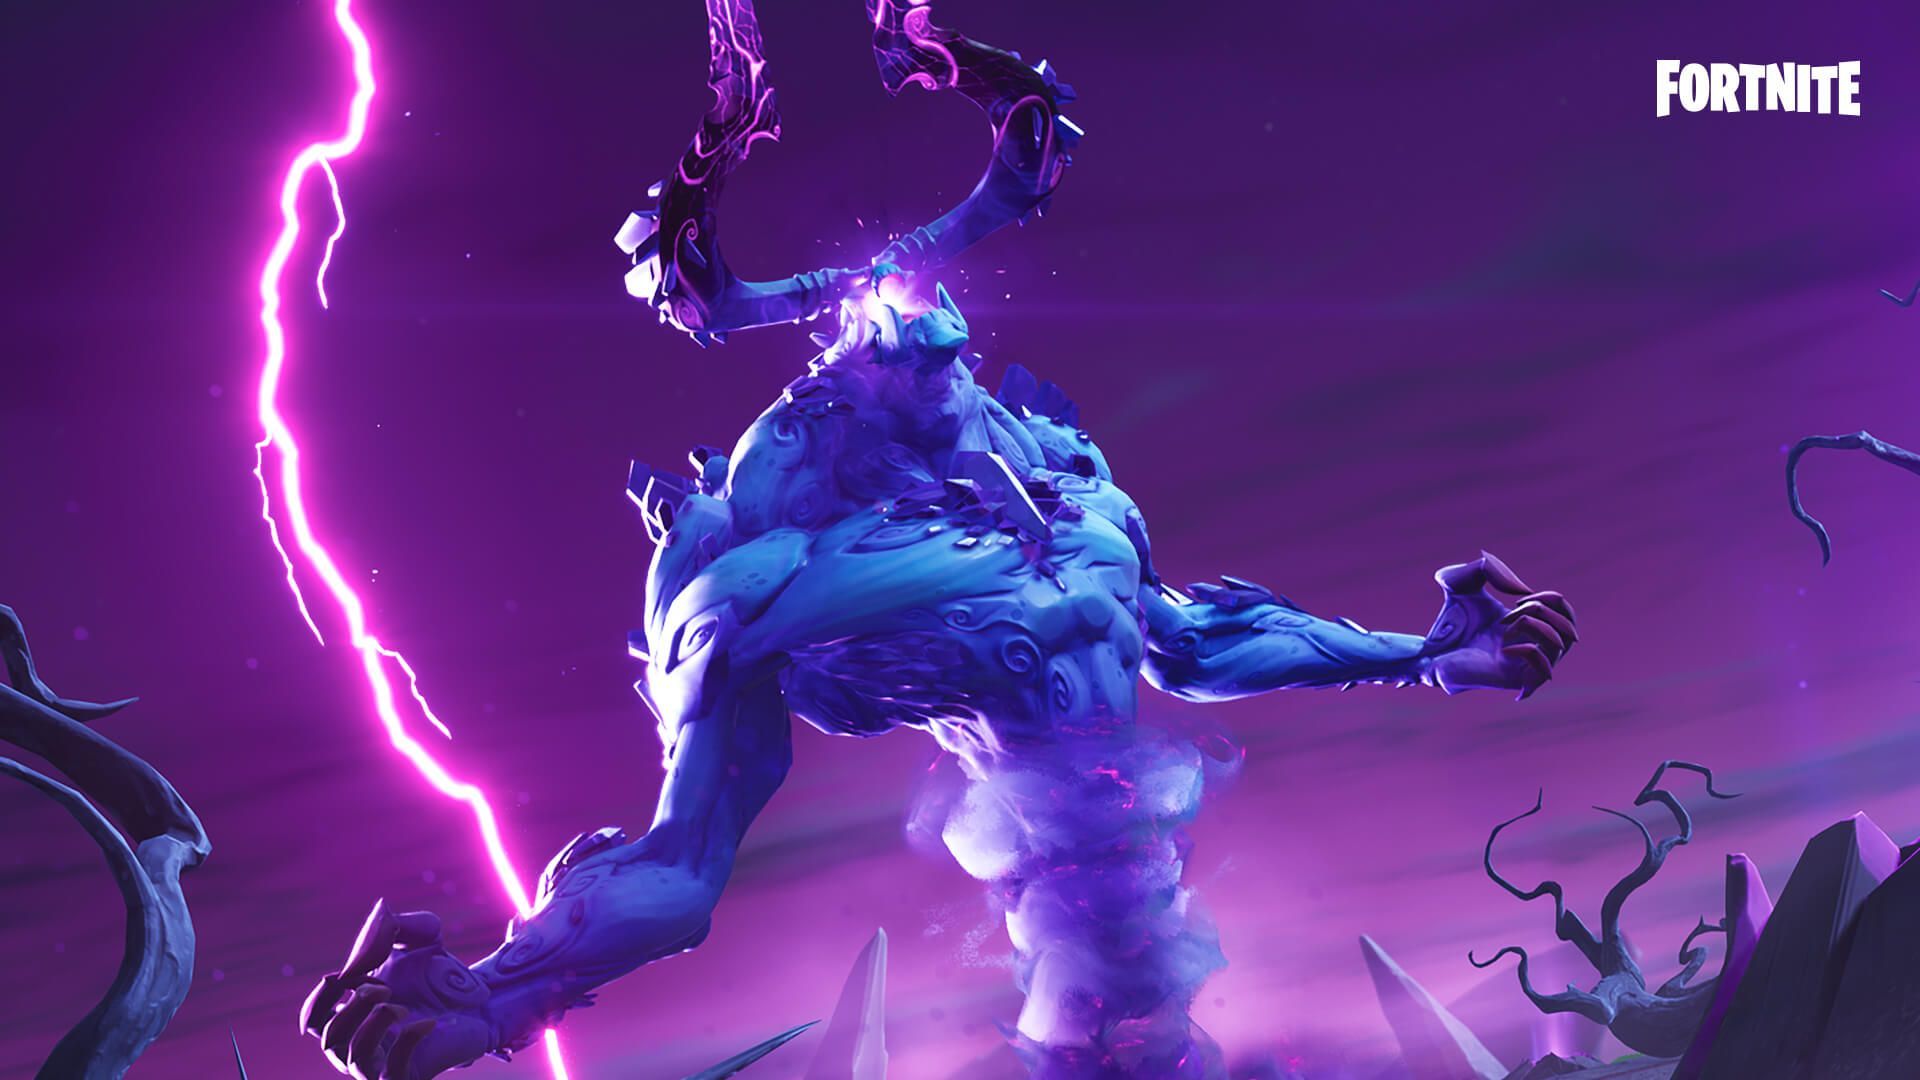 Fortnitemares goes live, unleashing the terror of the Storm King ONE